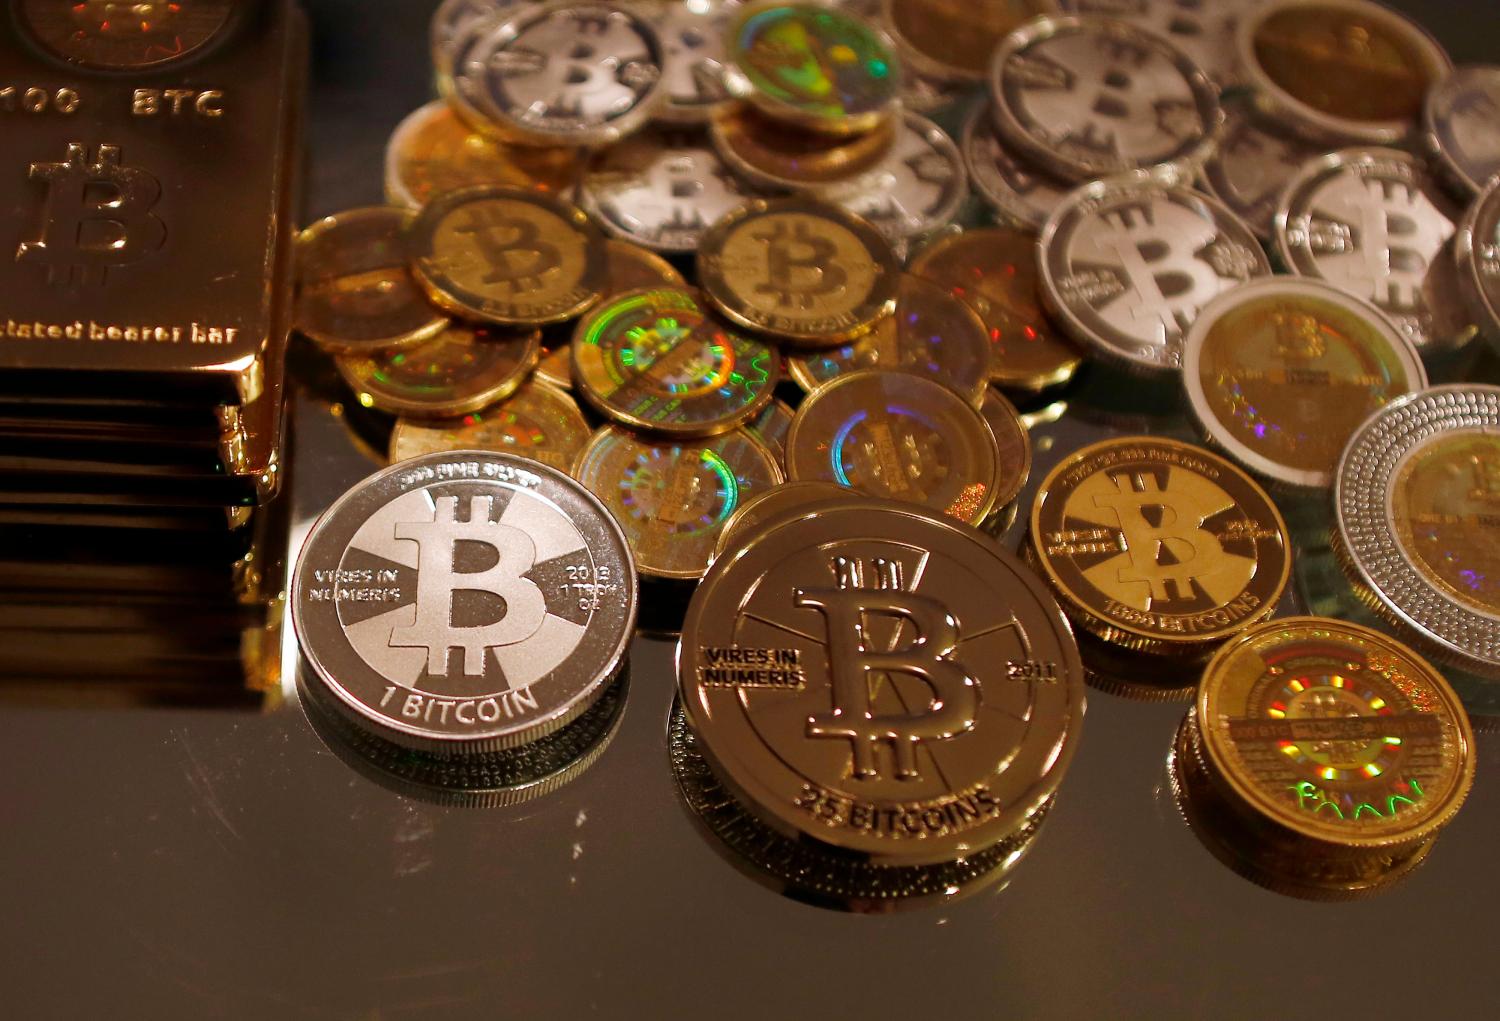 Bitcoins created by enthusiast Mike Caldwell are seen in a photo illustration at his office in Sandy, Utah, September 17, 2013. Caldwell produces physical coins Bitcoins, which have been around since 2008, are a form of electronic money that can be exchanged without using traditional banking or money transfer systems. REUTERS/Jim Urquhart  (UNITED STATES - Tags: BUSINESS SOCIETY) - GF2E99H1A2P01